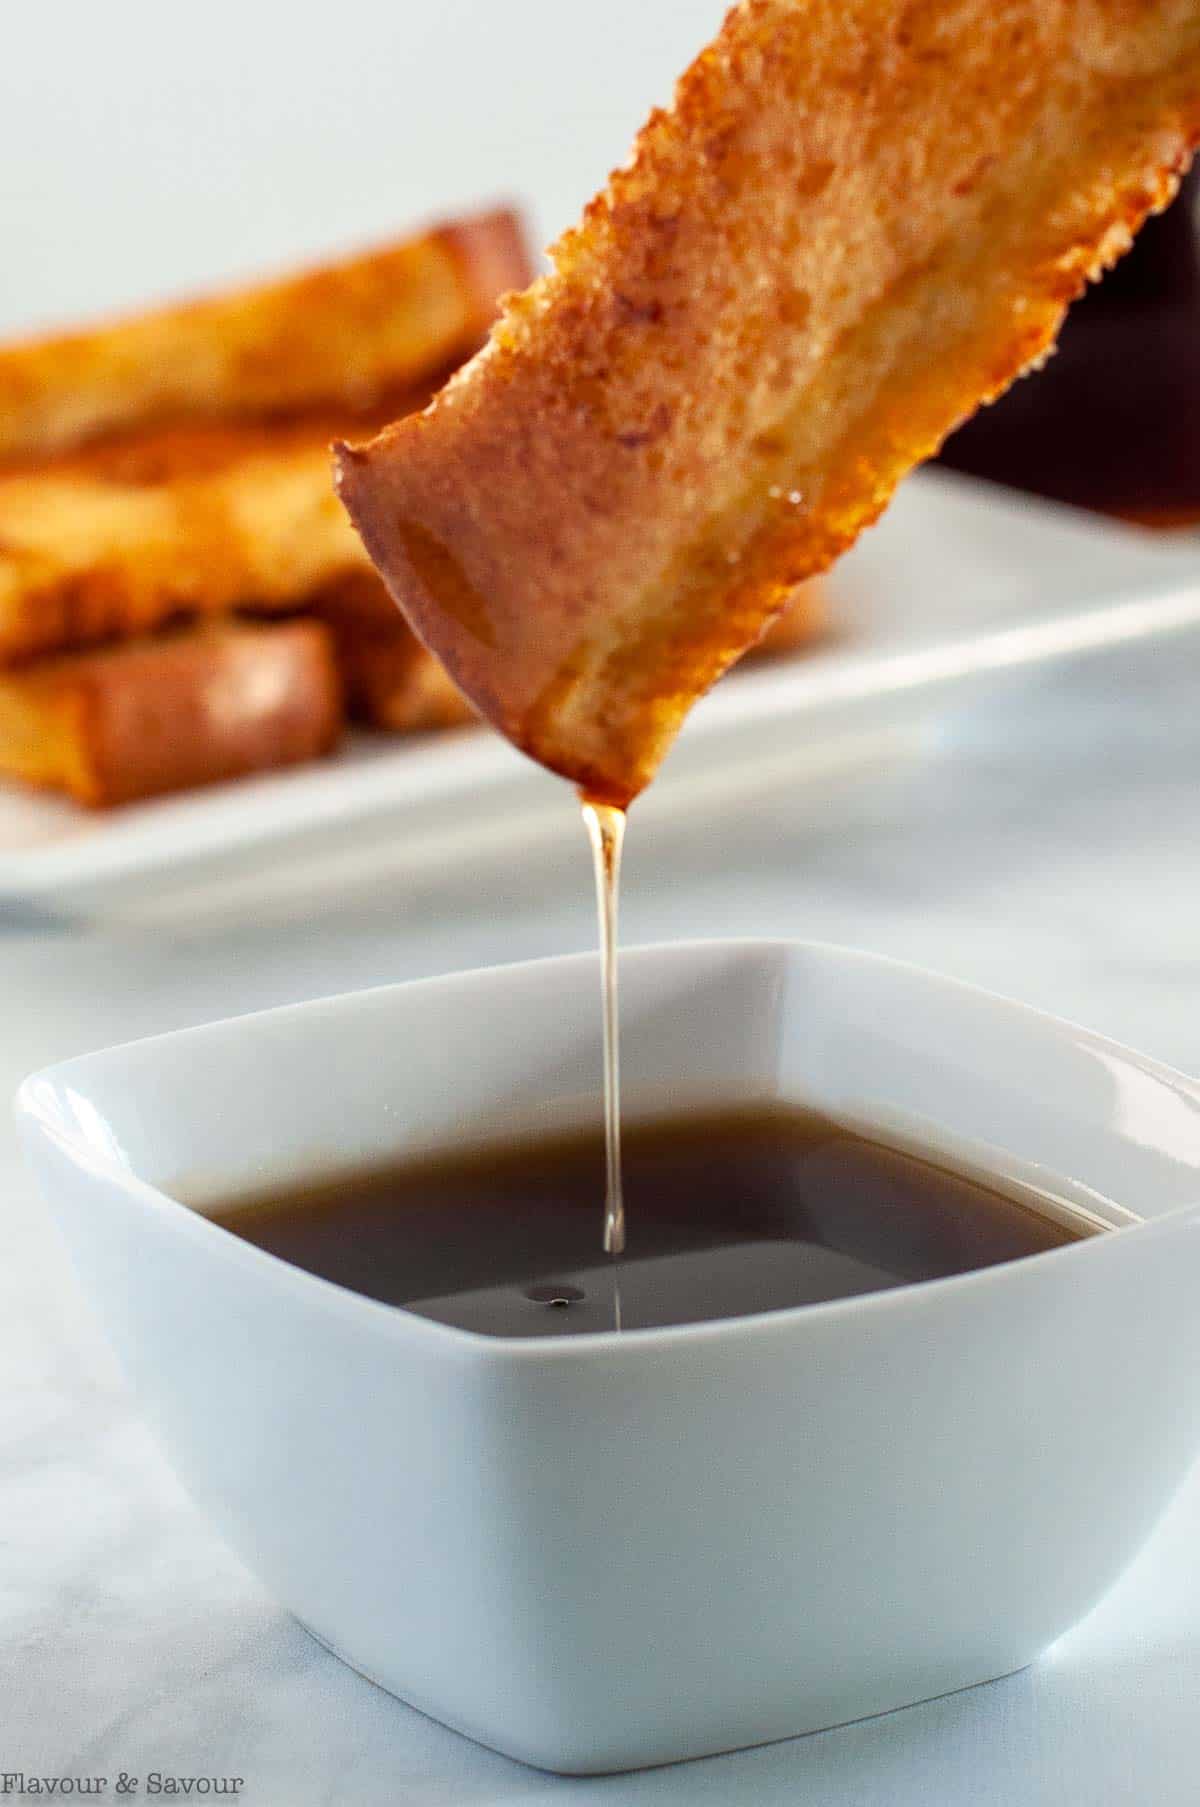 Maple syrup dripping from a French Toast stick